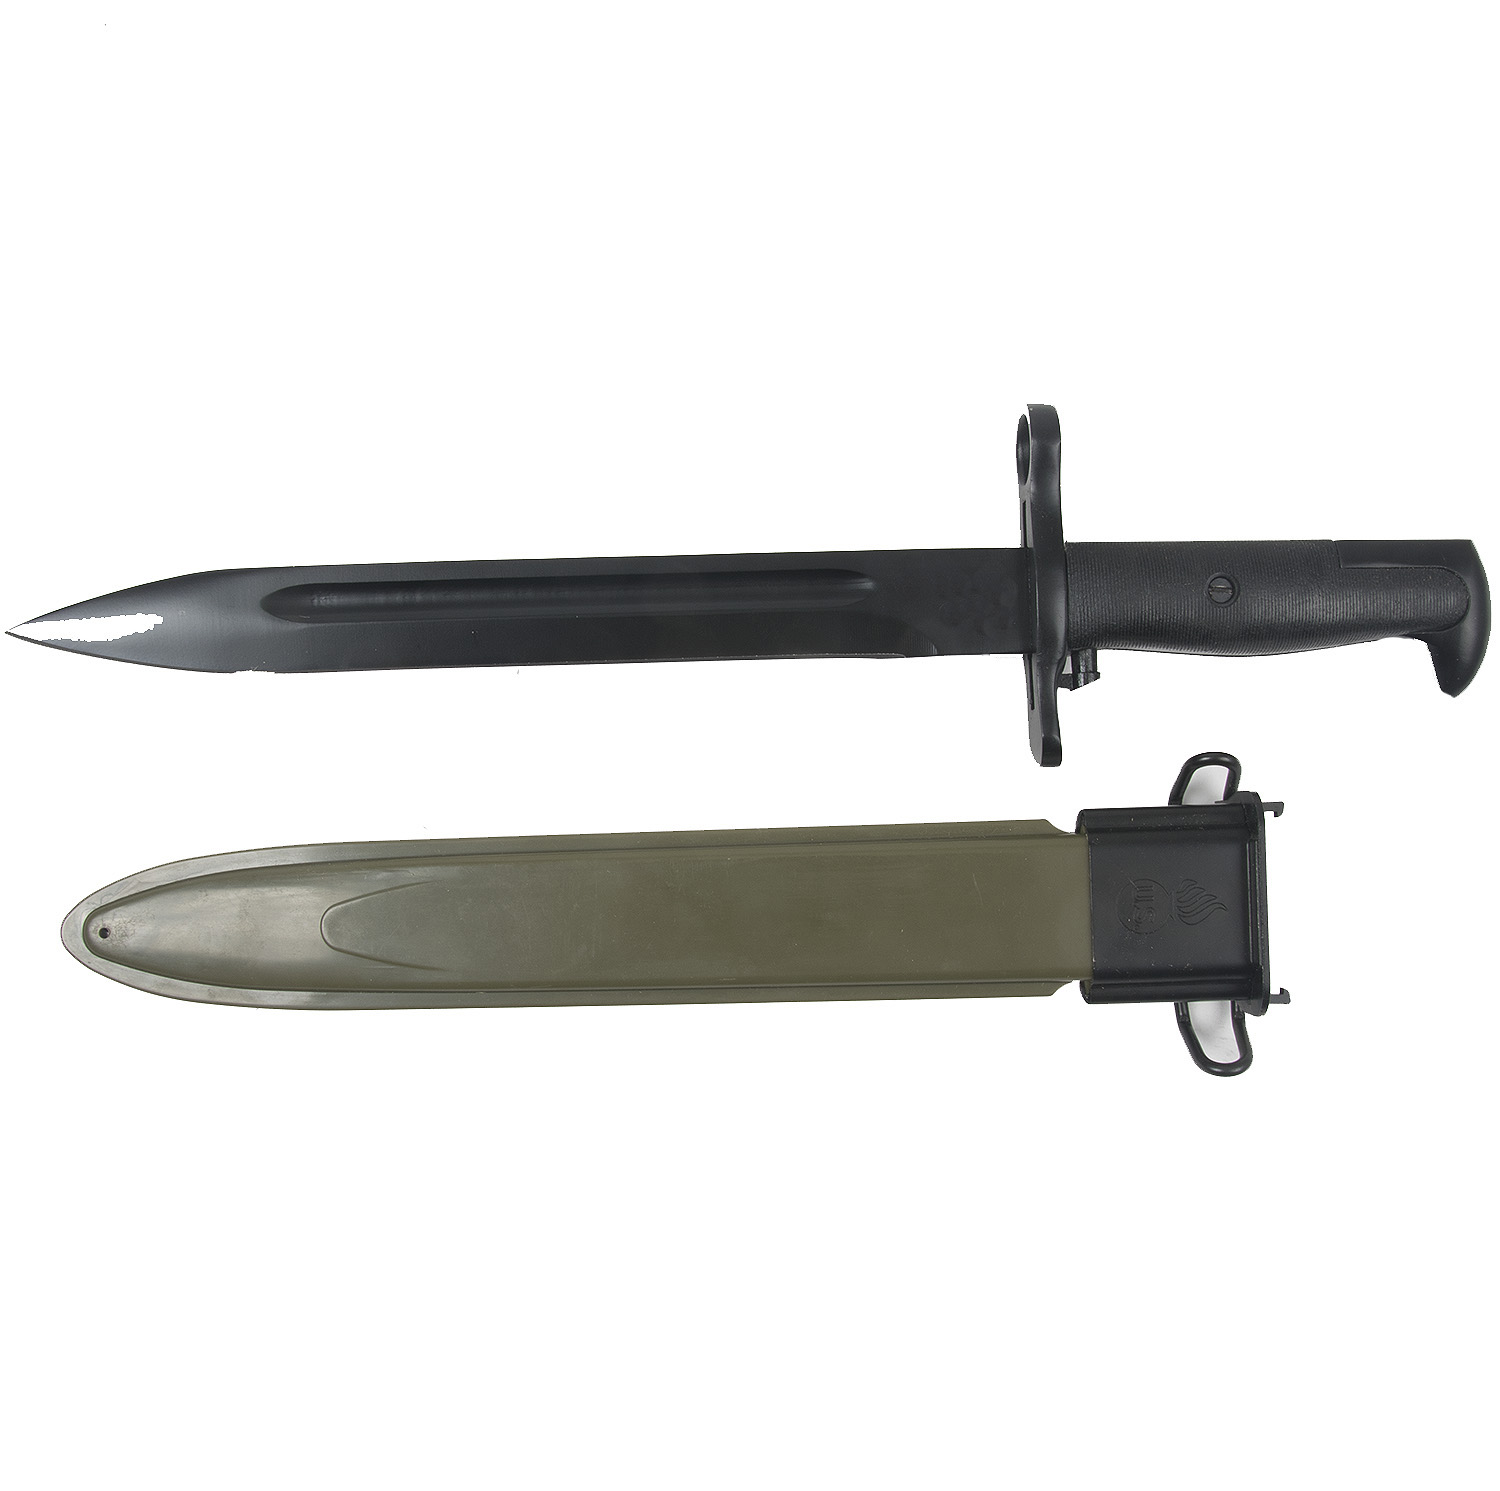 Reproduction of the WWII M1 bayonet and M3 Scabbard issued to US soldiers a...